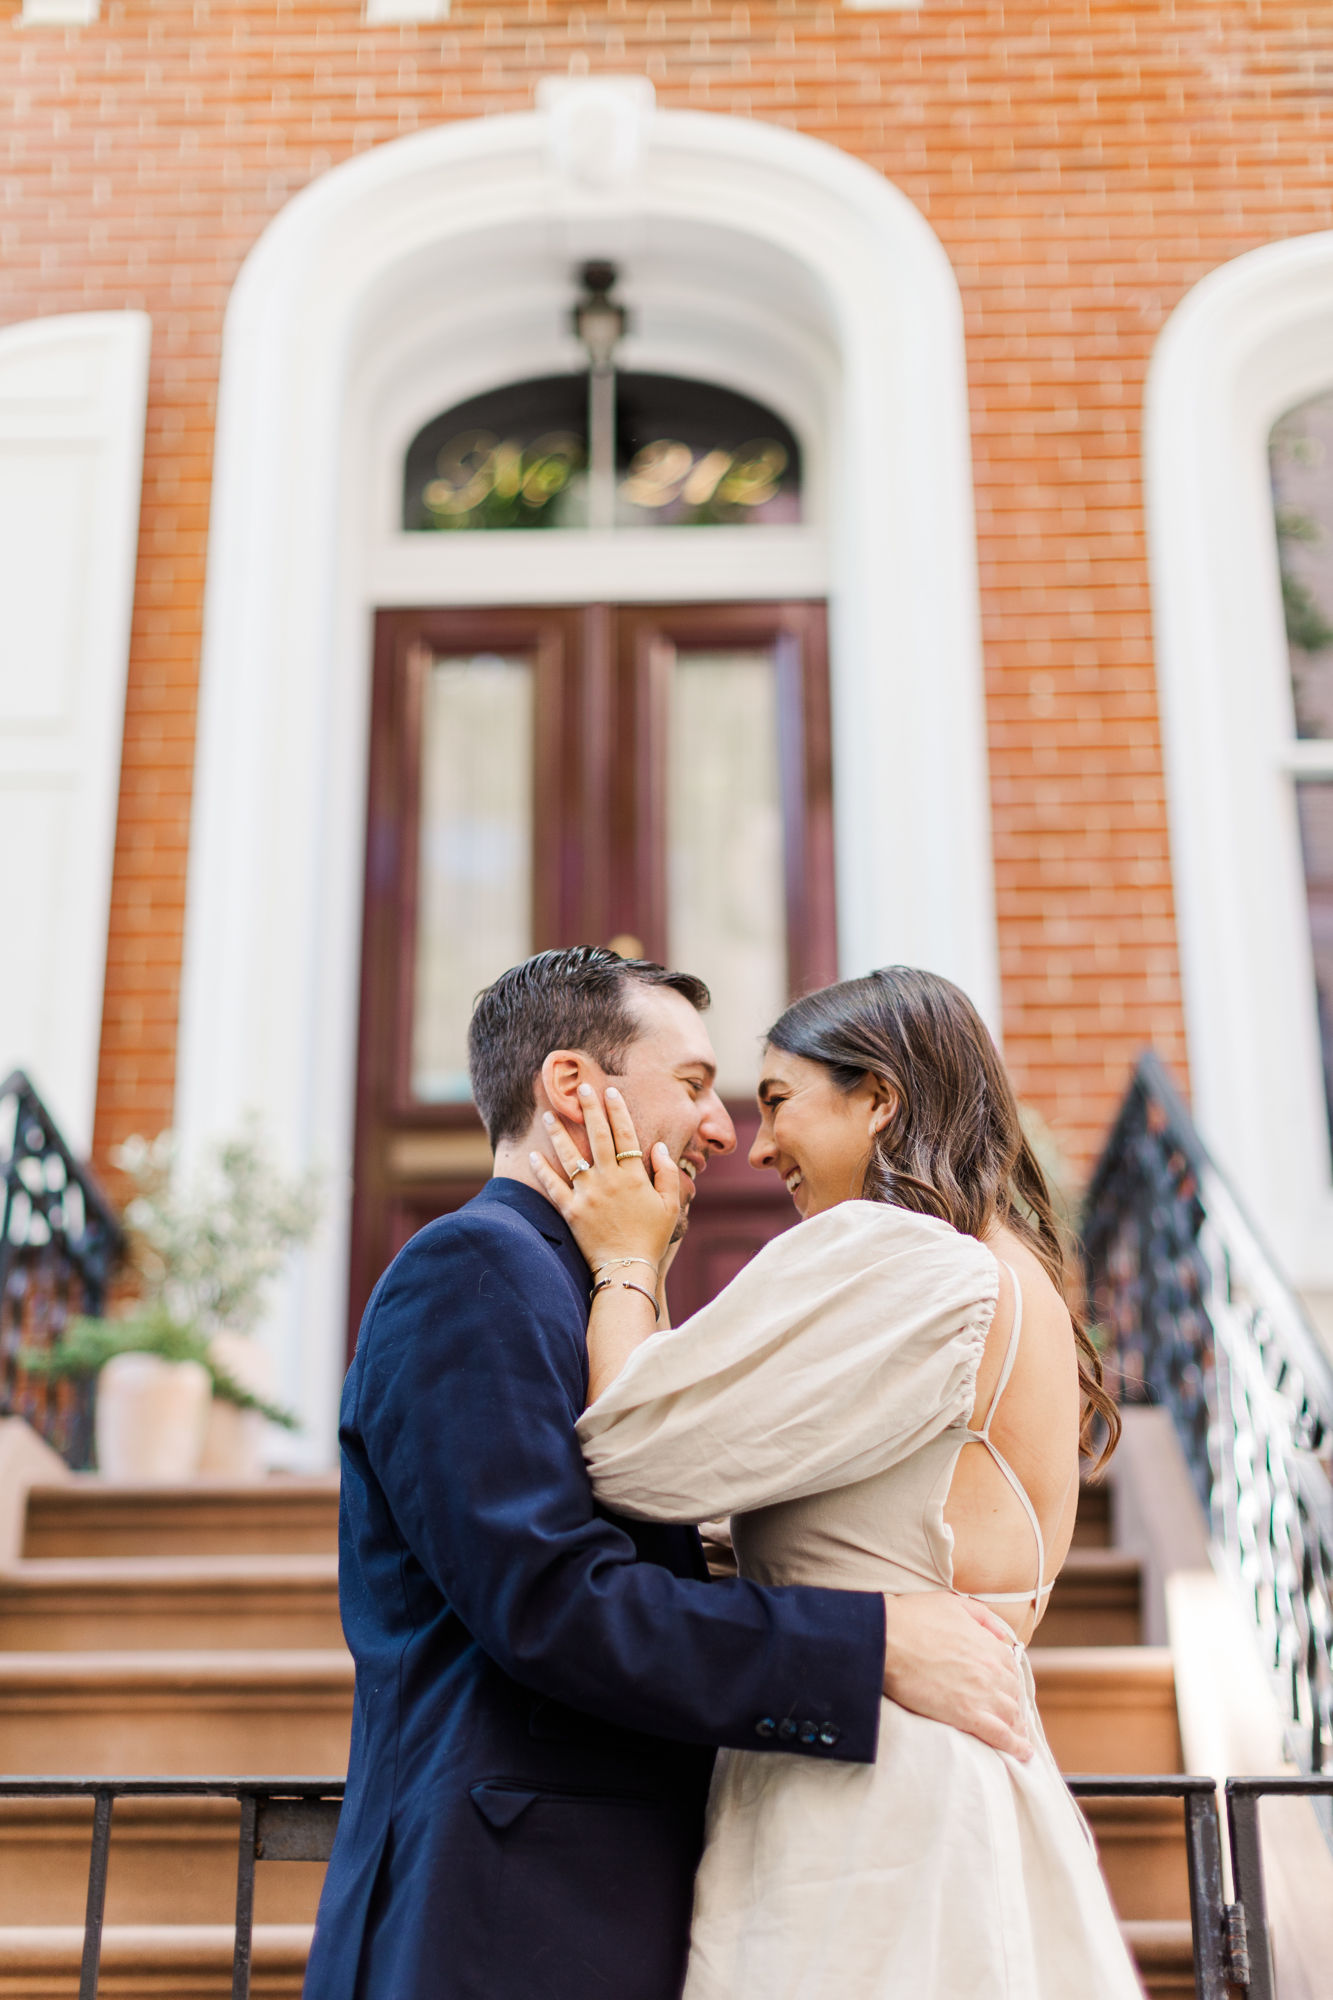 Whimsical Engagement Photos In Upper East Side